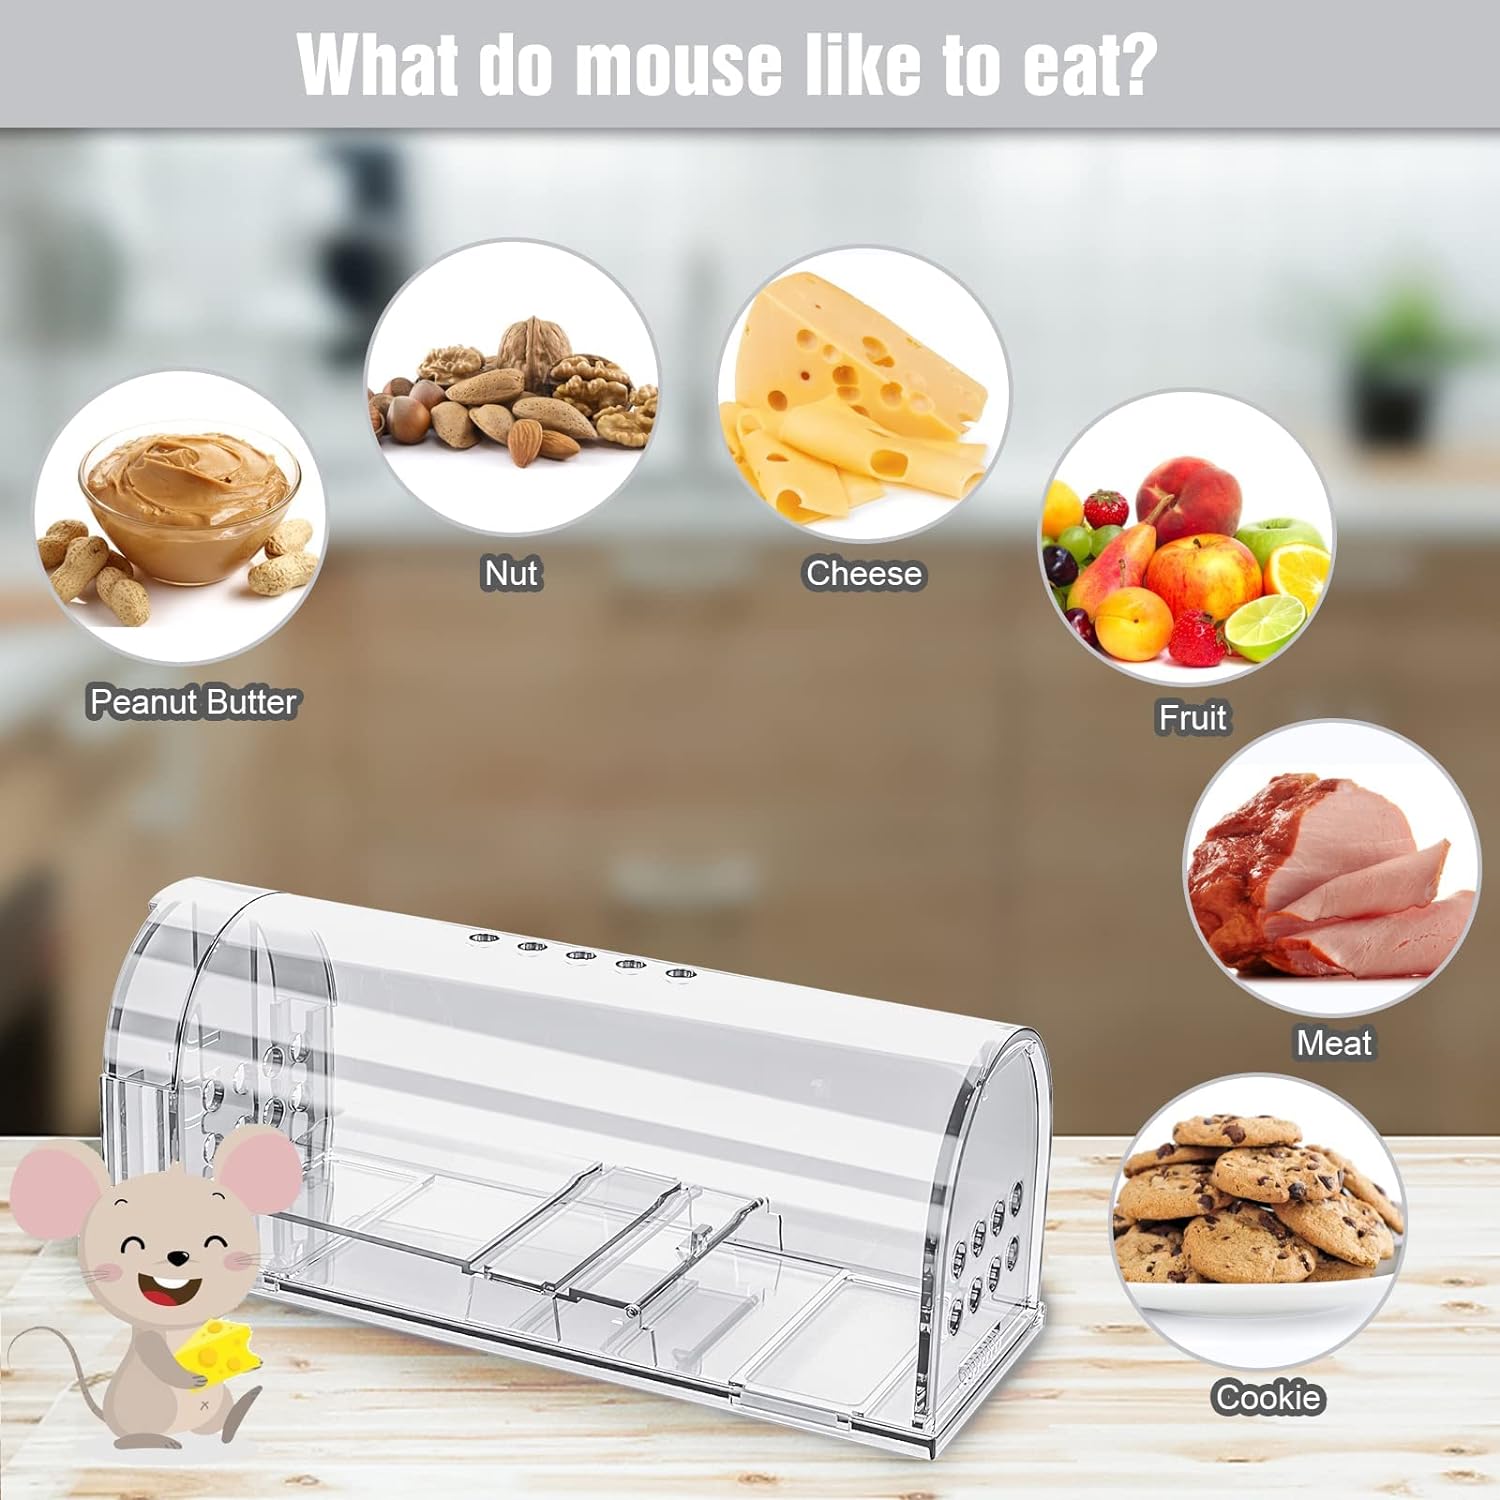 4 Pcs Humane Mouse Trap, Catch and Release Mouse Traps That Work, Mice Trap No Kill for mice, Outdoor Catcher Non Killer Small Mole Capture Cage